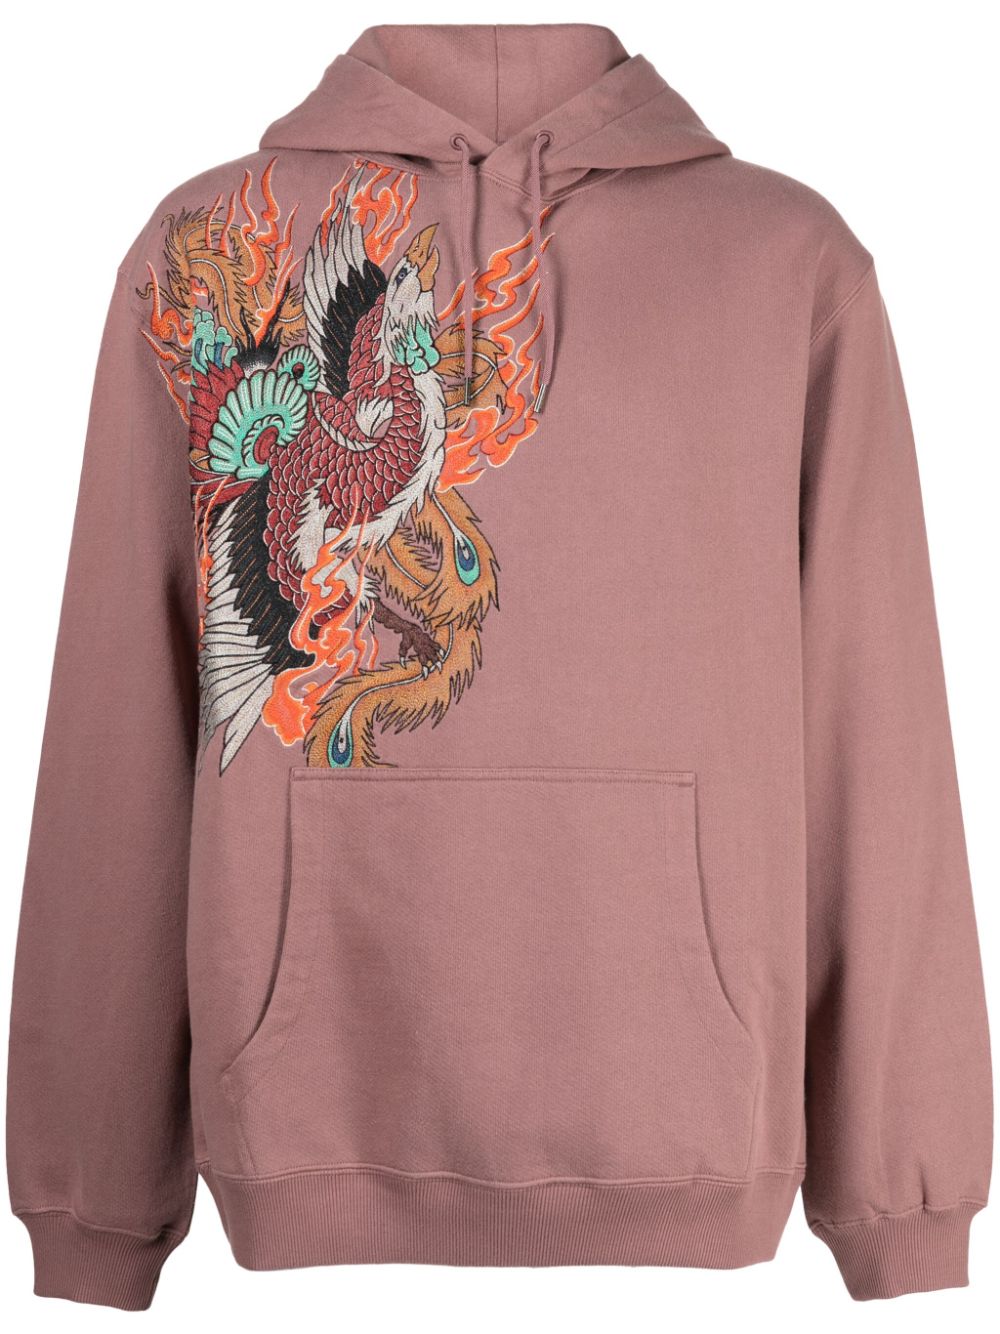 Fire Phoenix-embroidered drawstring hoodie